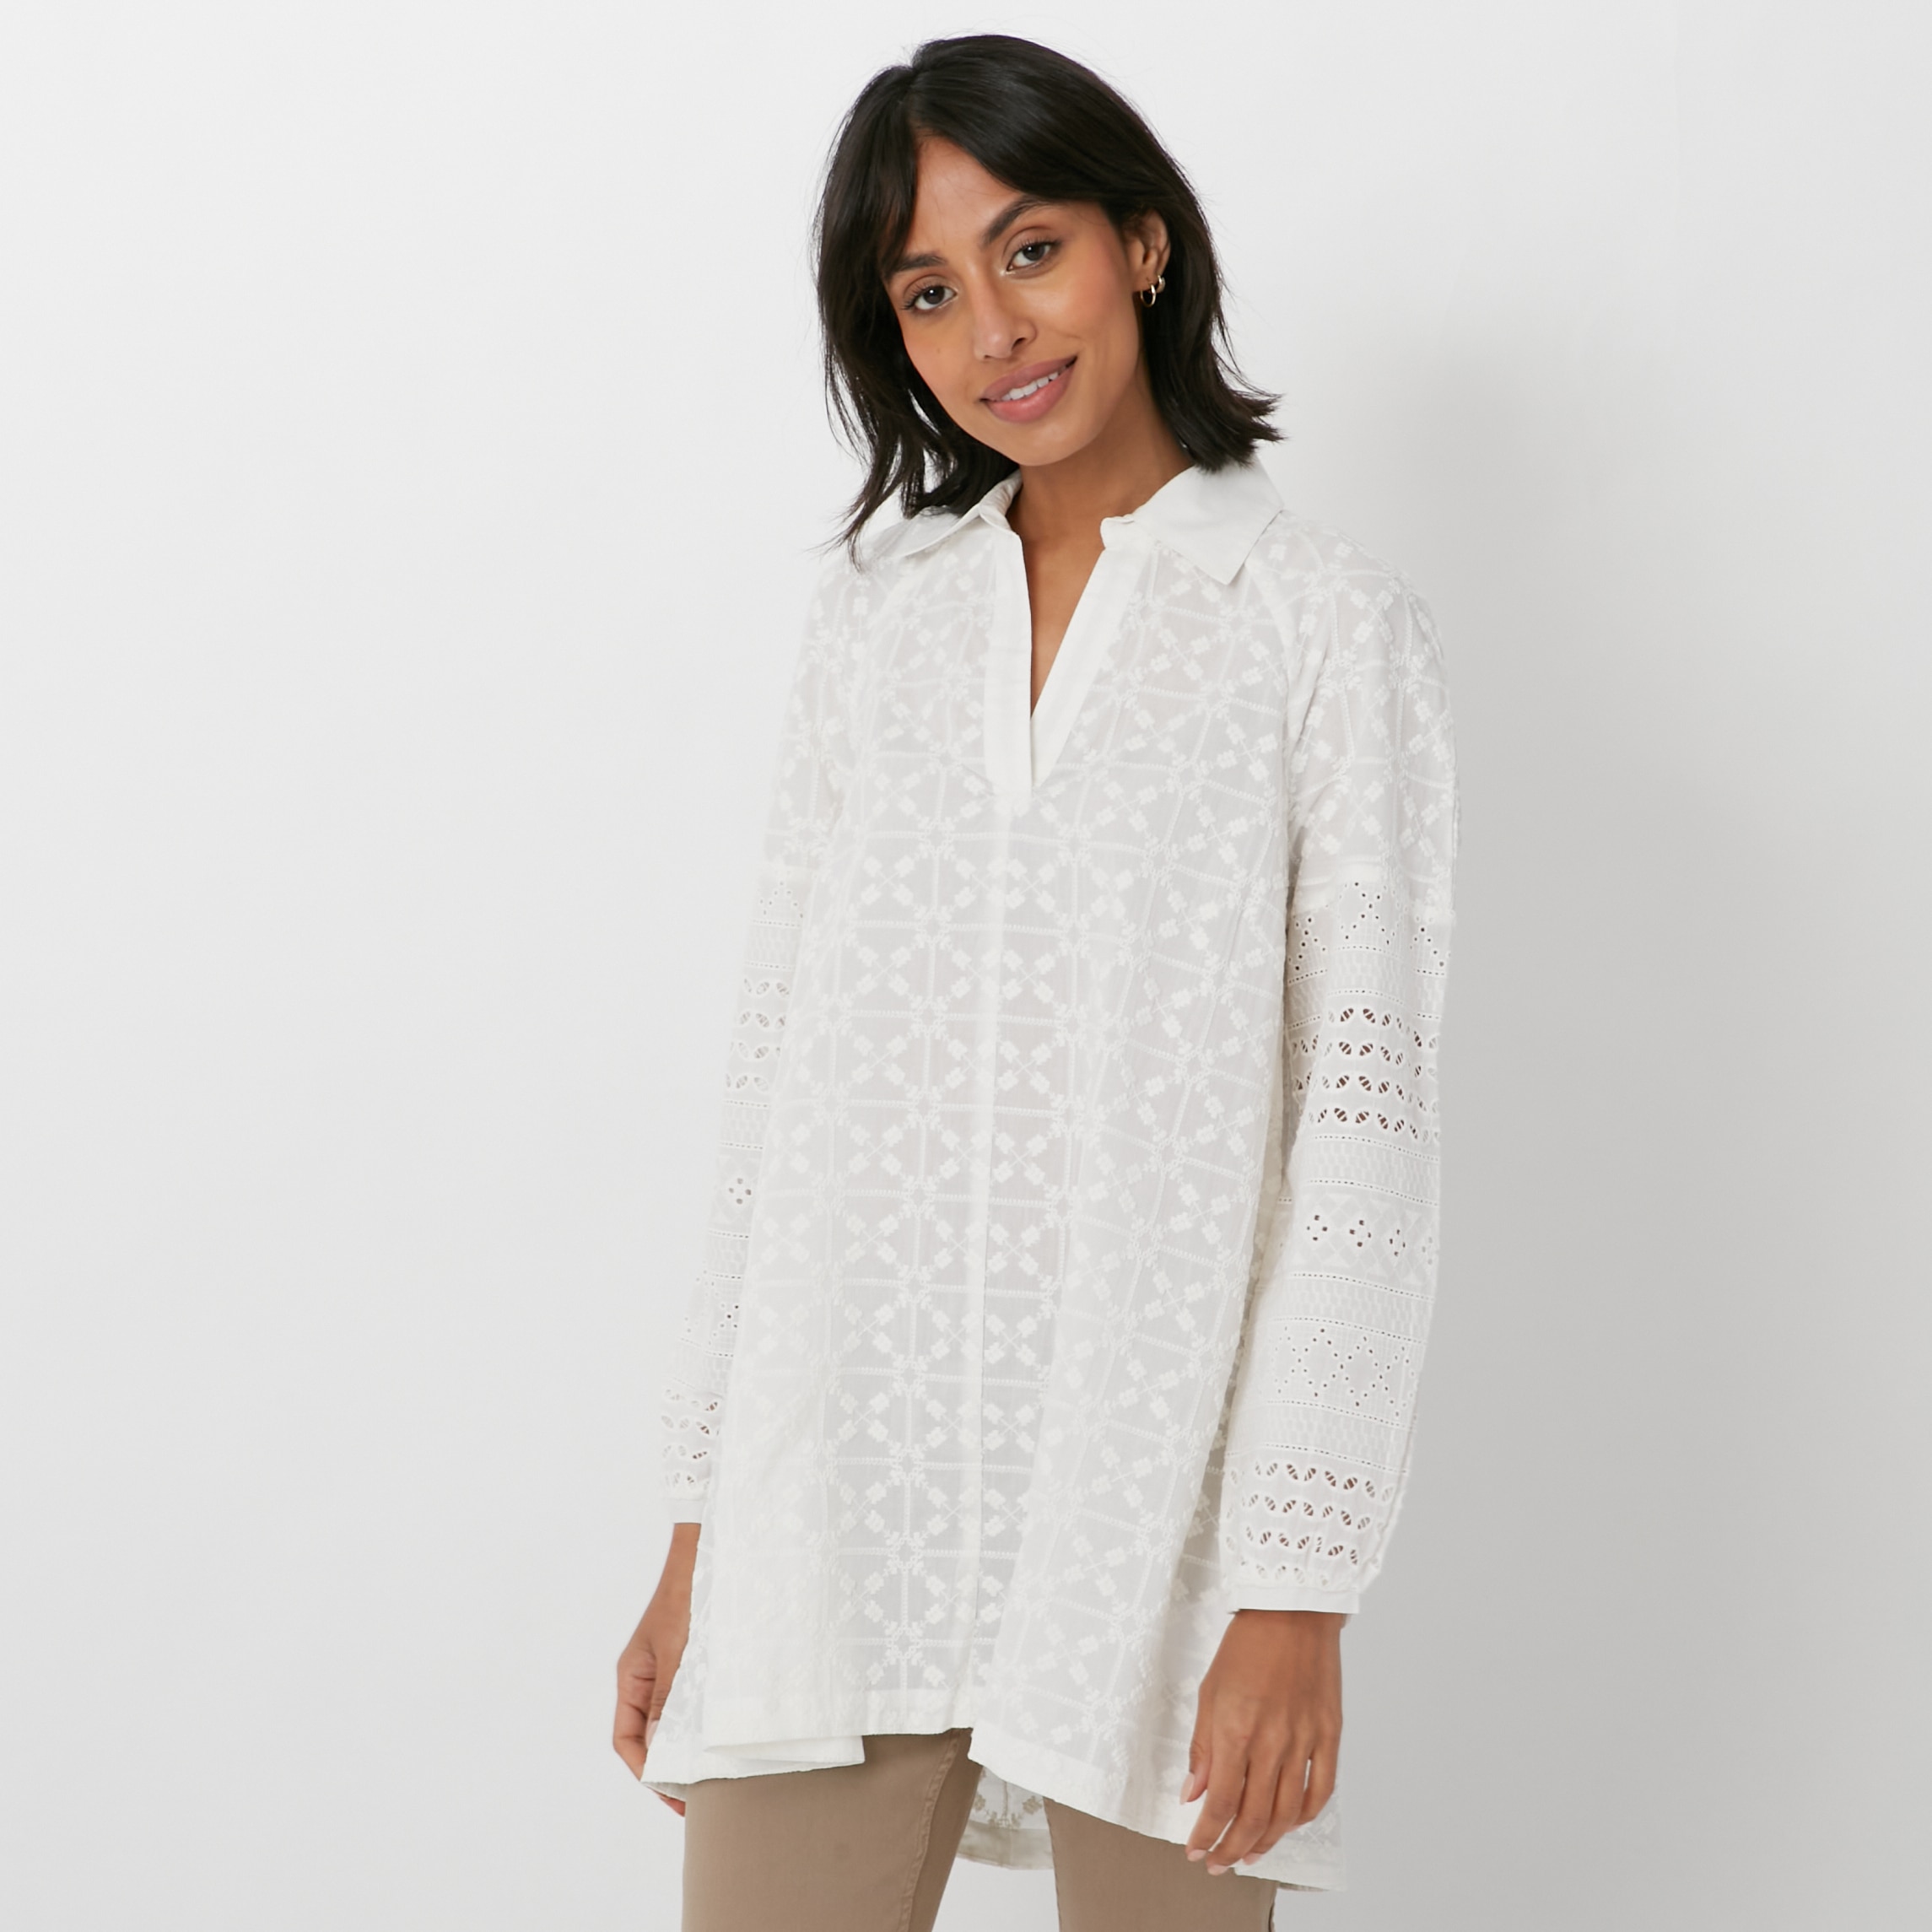 Badgley Mischka Cotton Eyelet Shirt With Embroidered Sleeve Detail